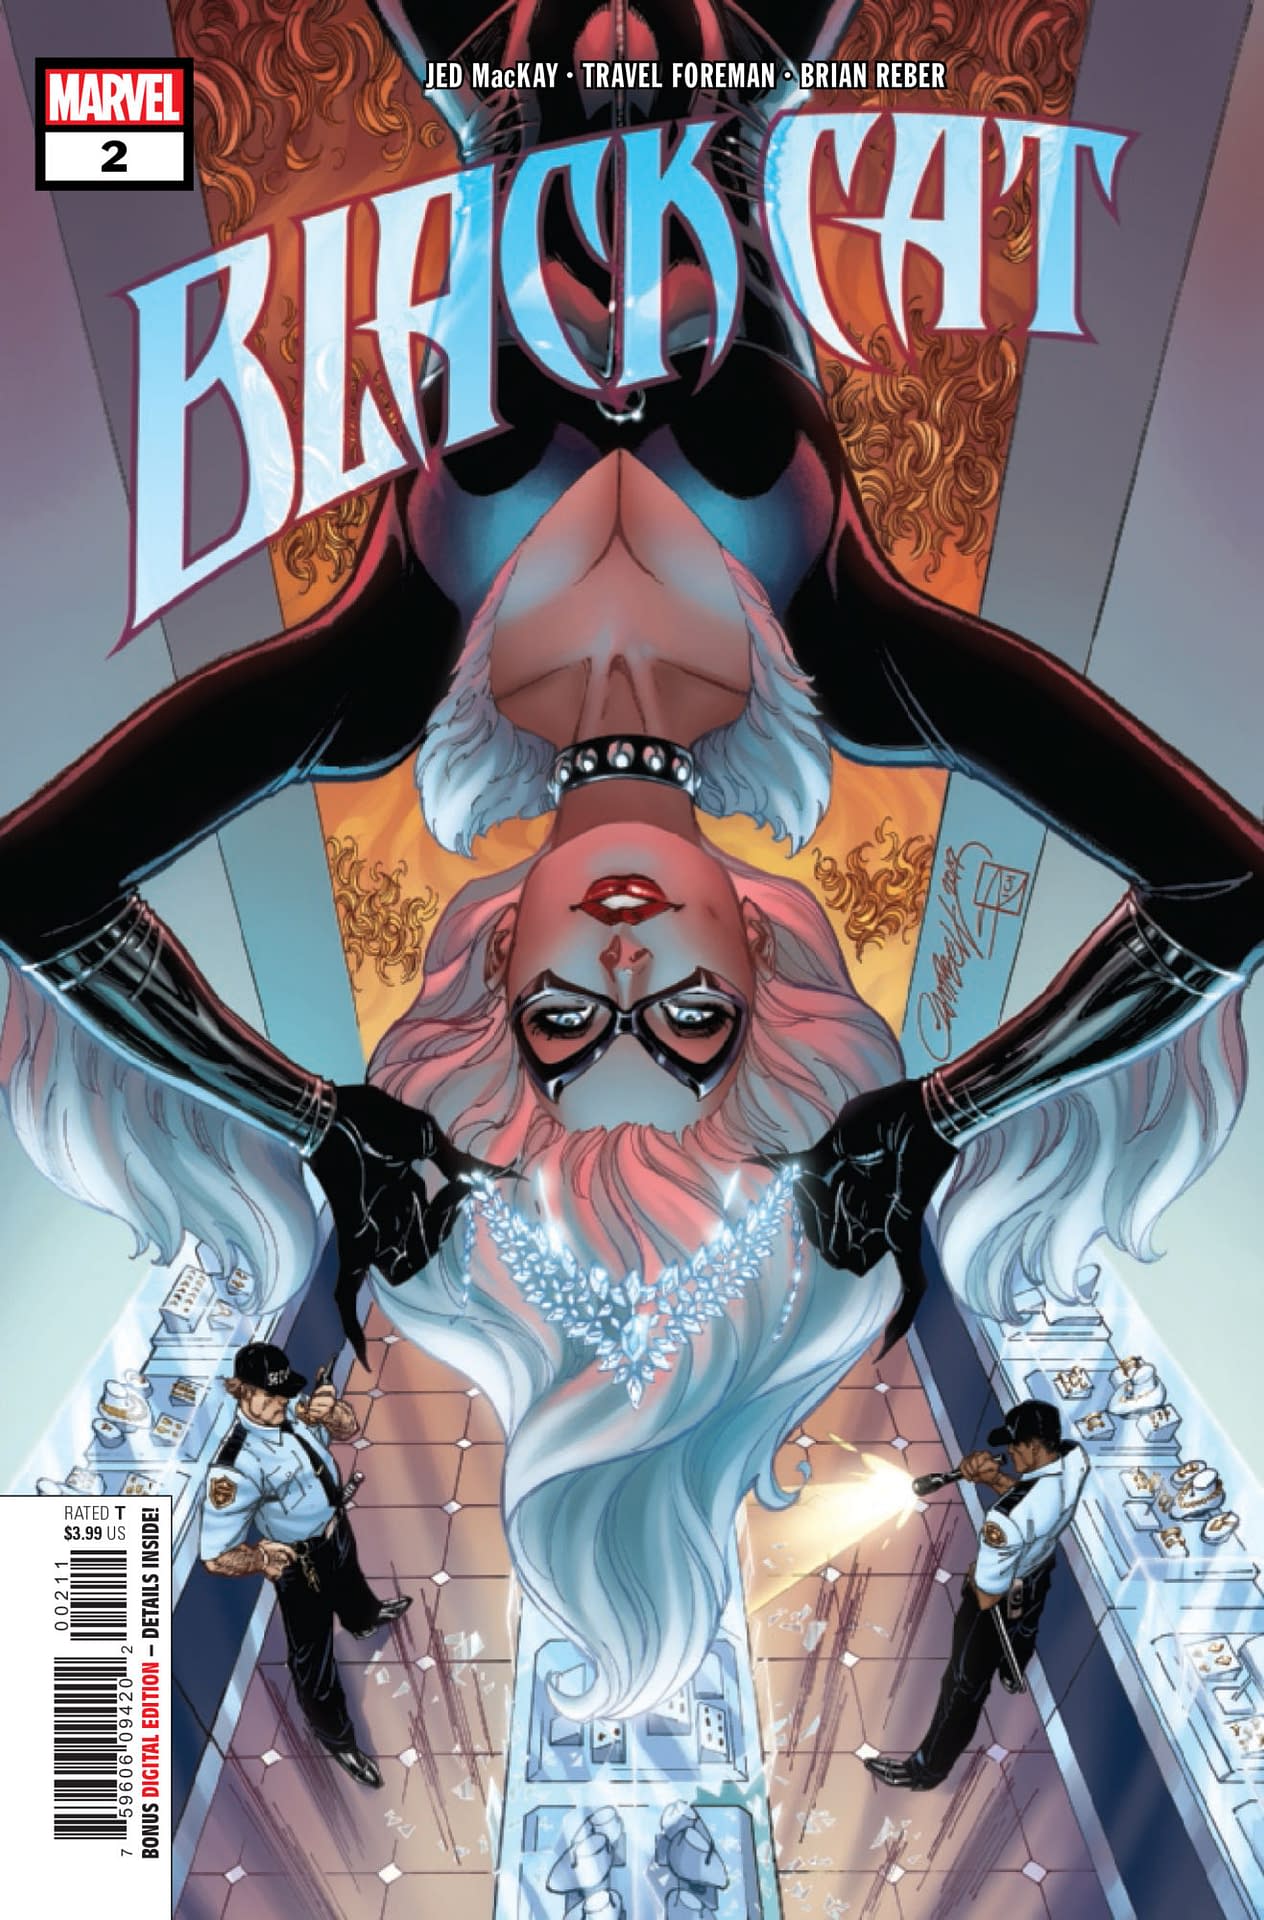 Black Cat #2: Does Spider-Man Have a Spider-@#$%? [Preview]